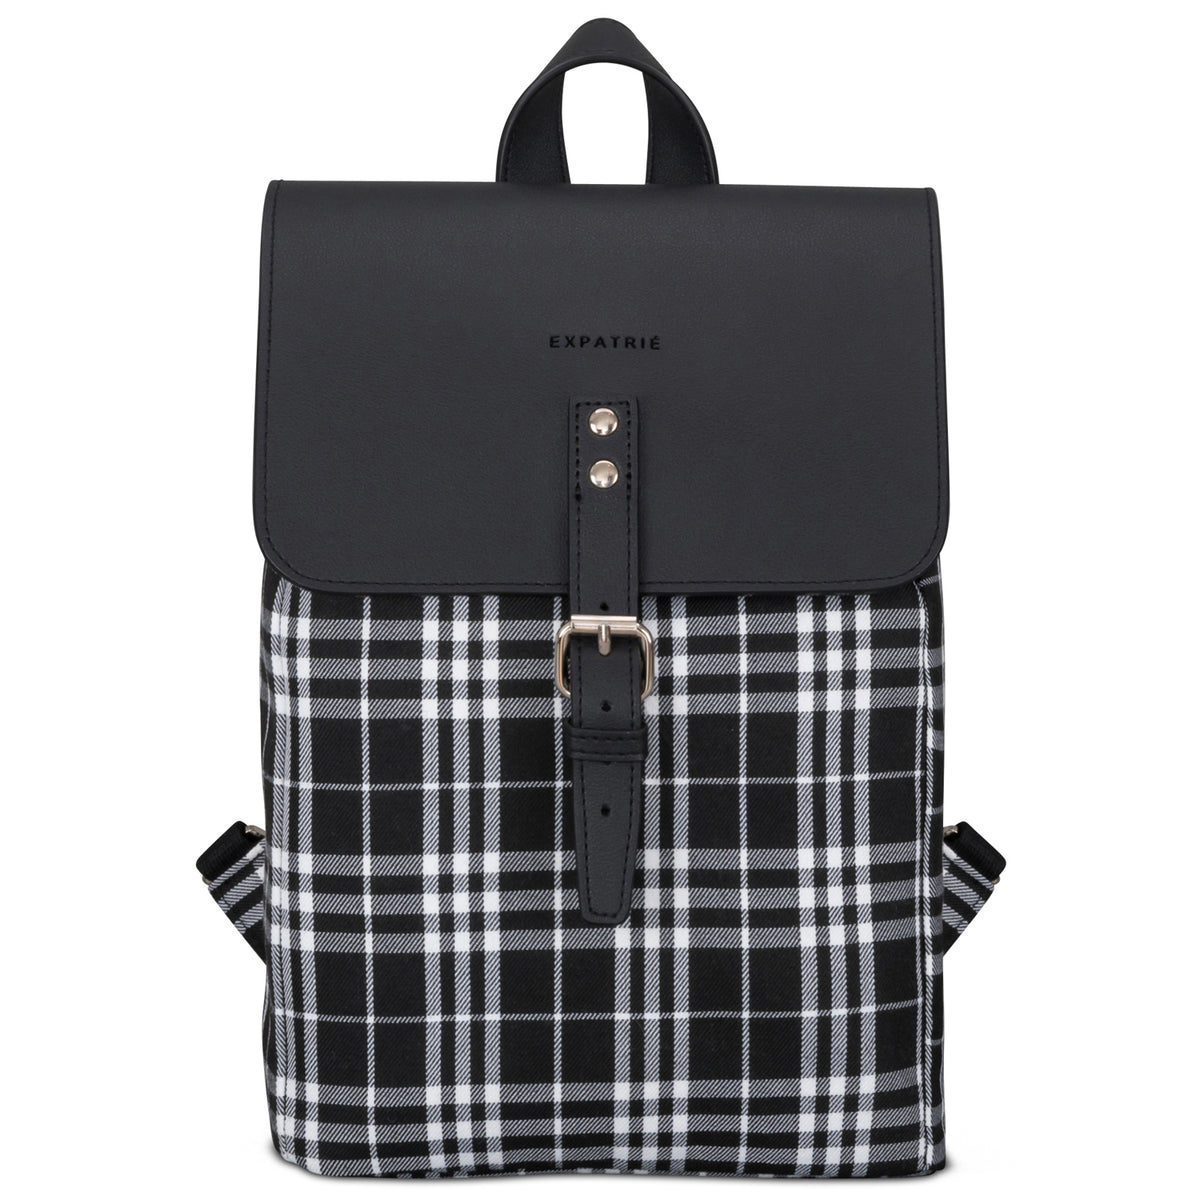 Checkered Backpack For Women, Mini Faux Leather Daypack, Plaid